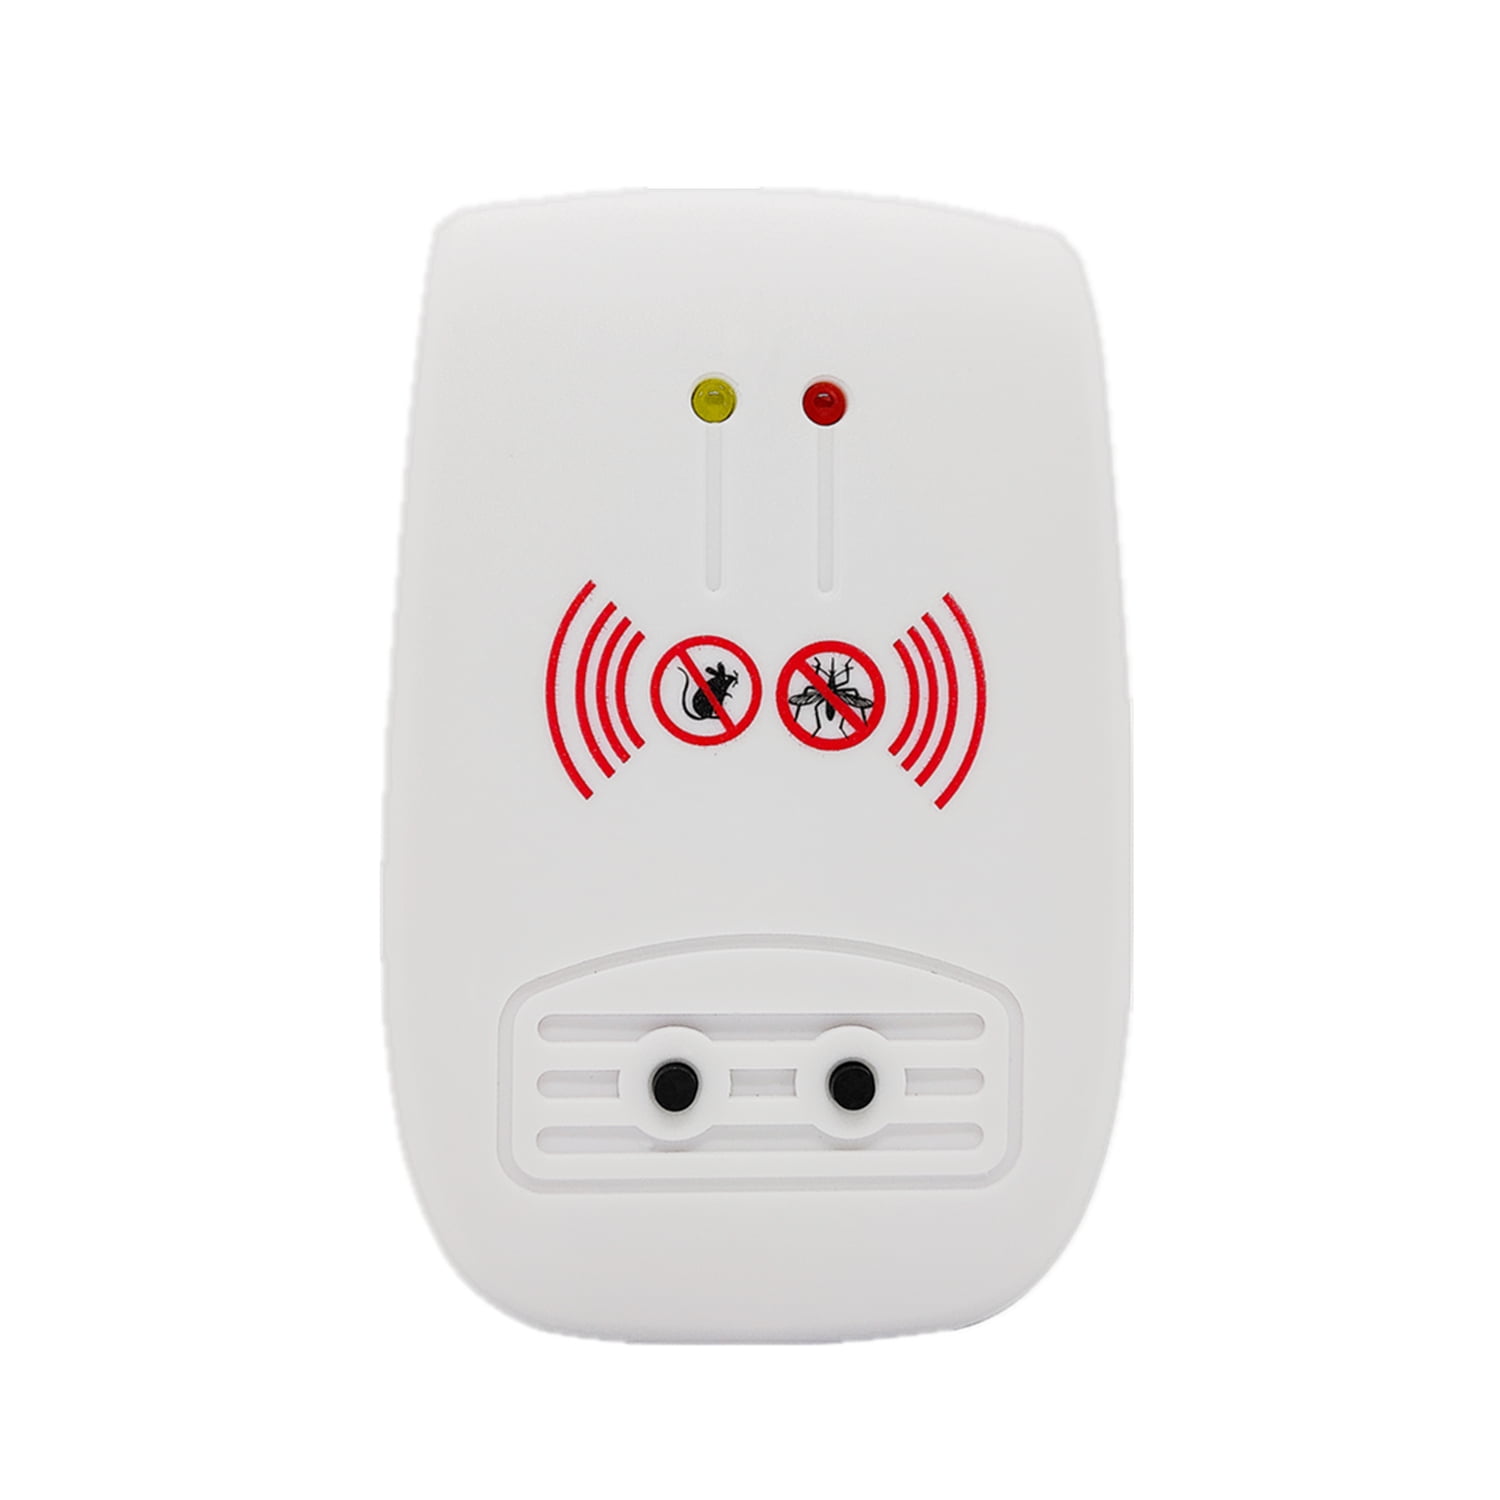 Ultrasonic Pest Repeller Electronic Rat Mouse Mice Spider Insect Deterrent Plug